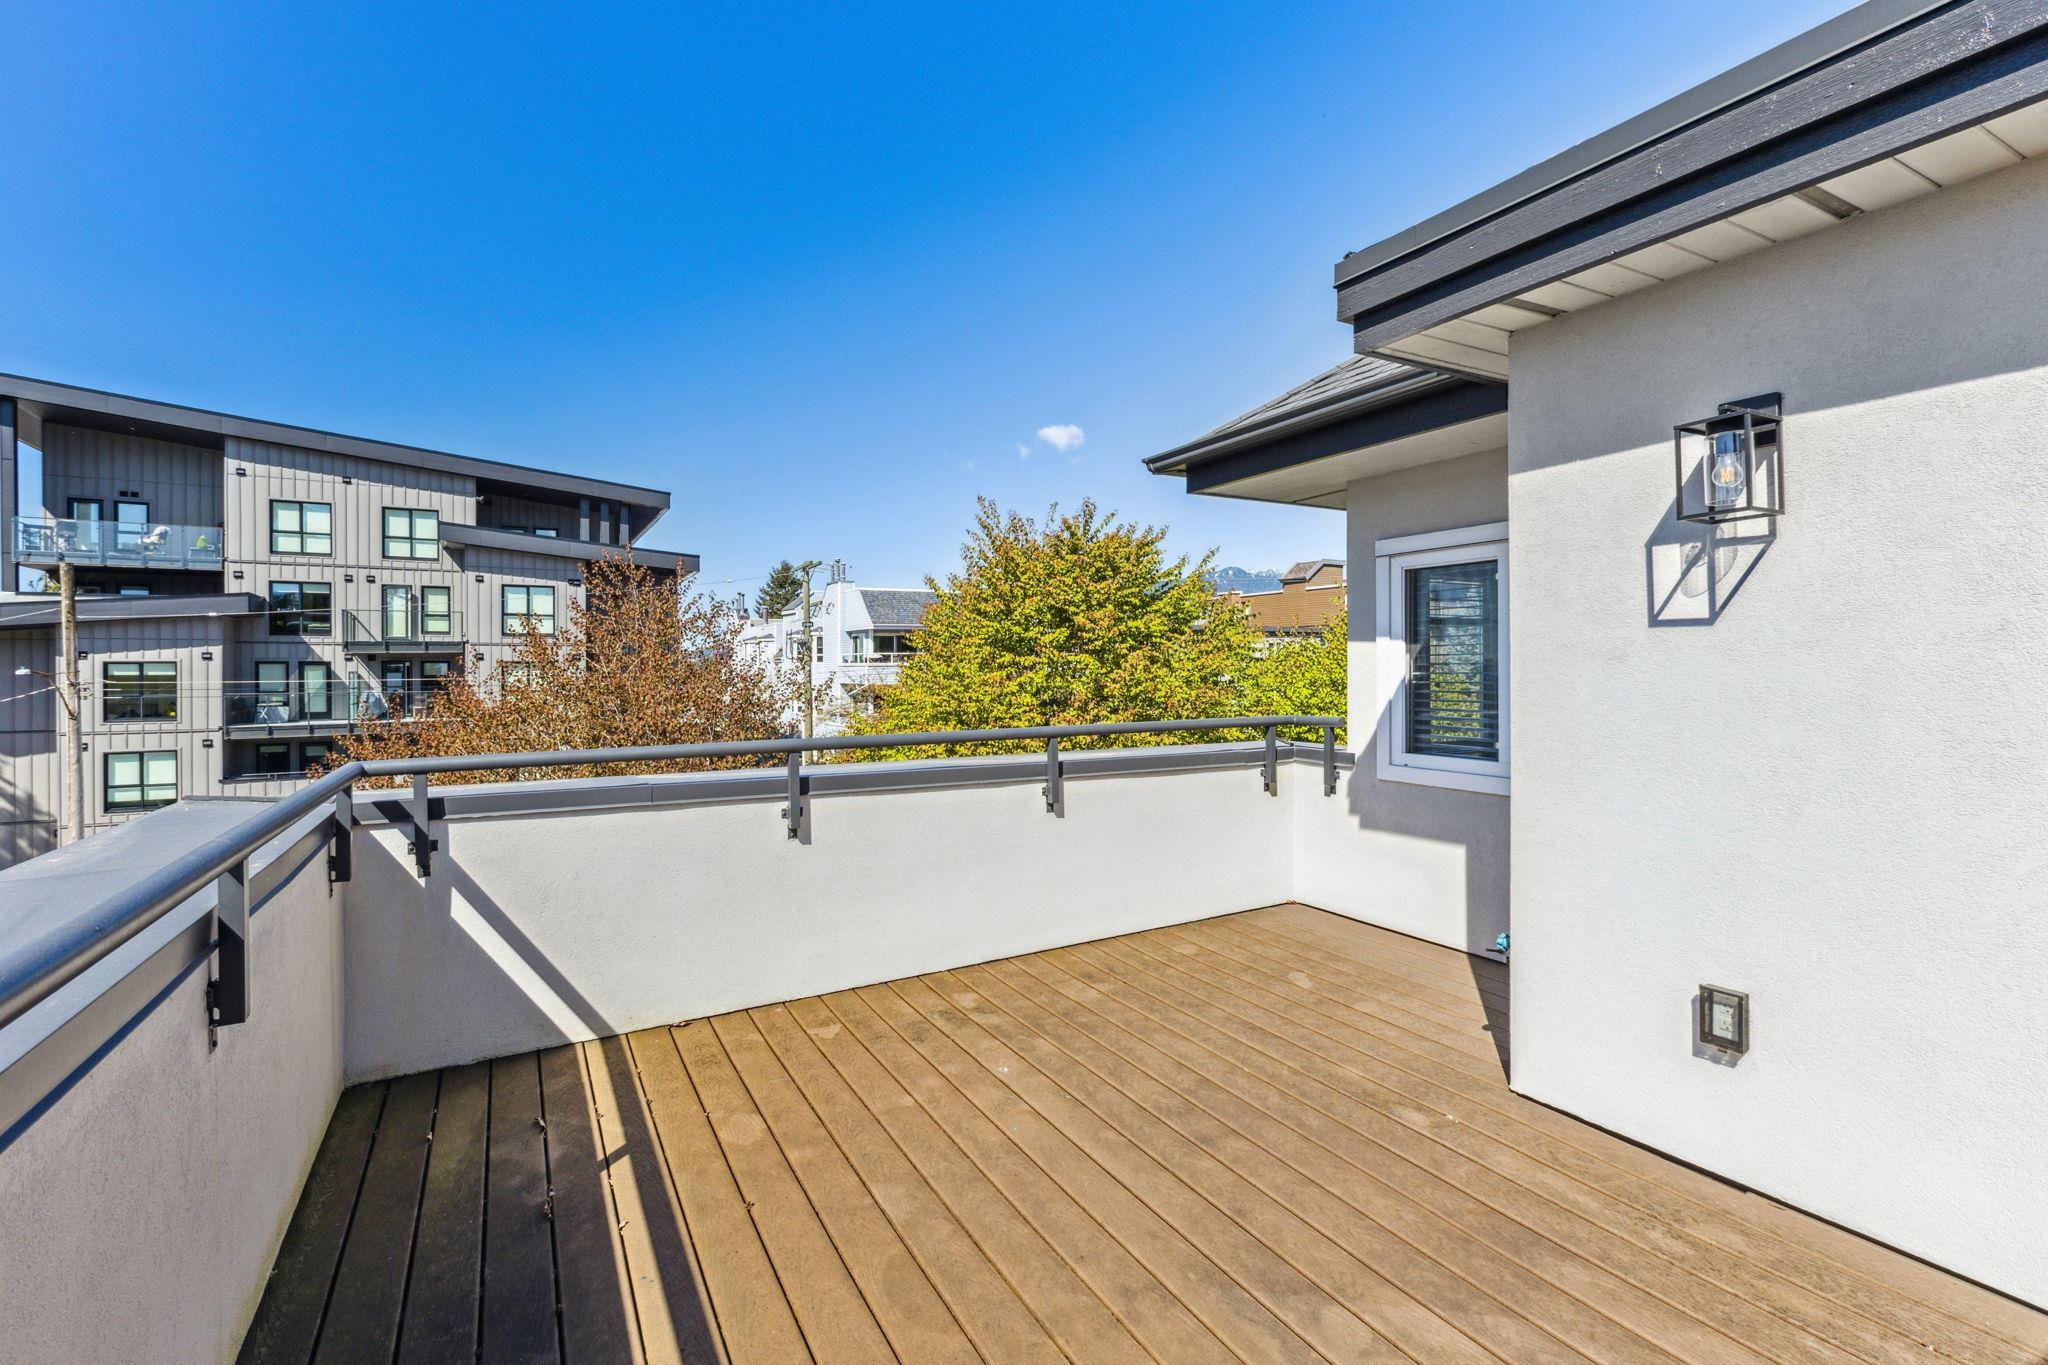 Listing image of 2606 LONSDALE AVENUE